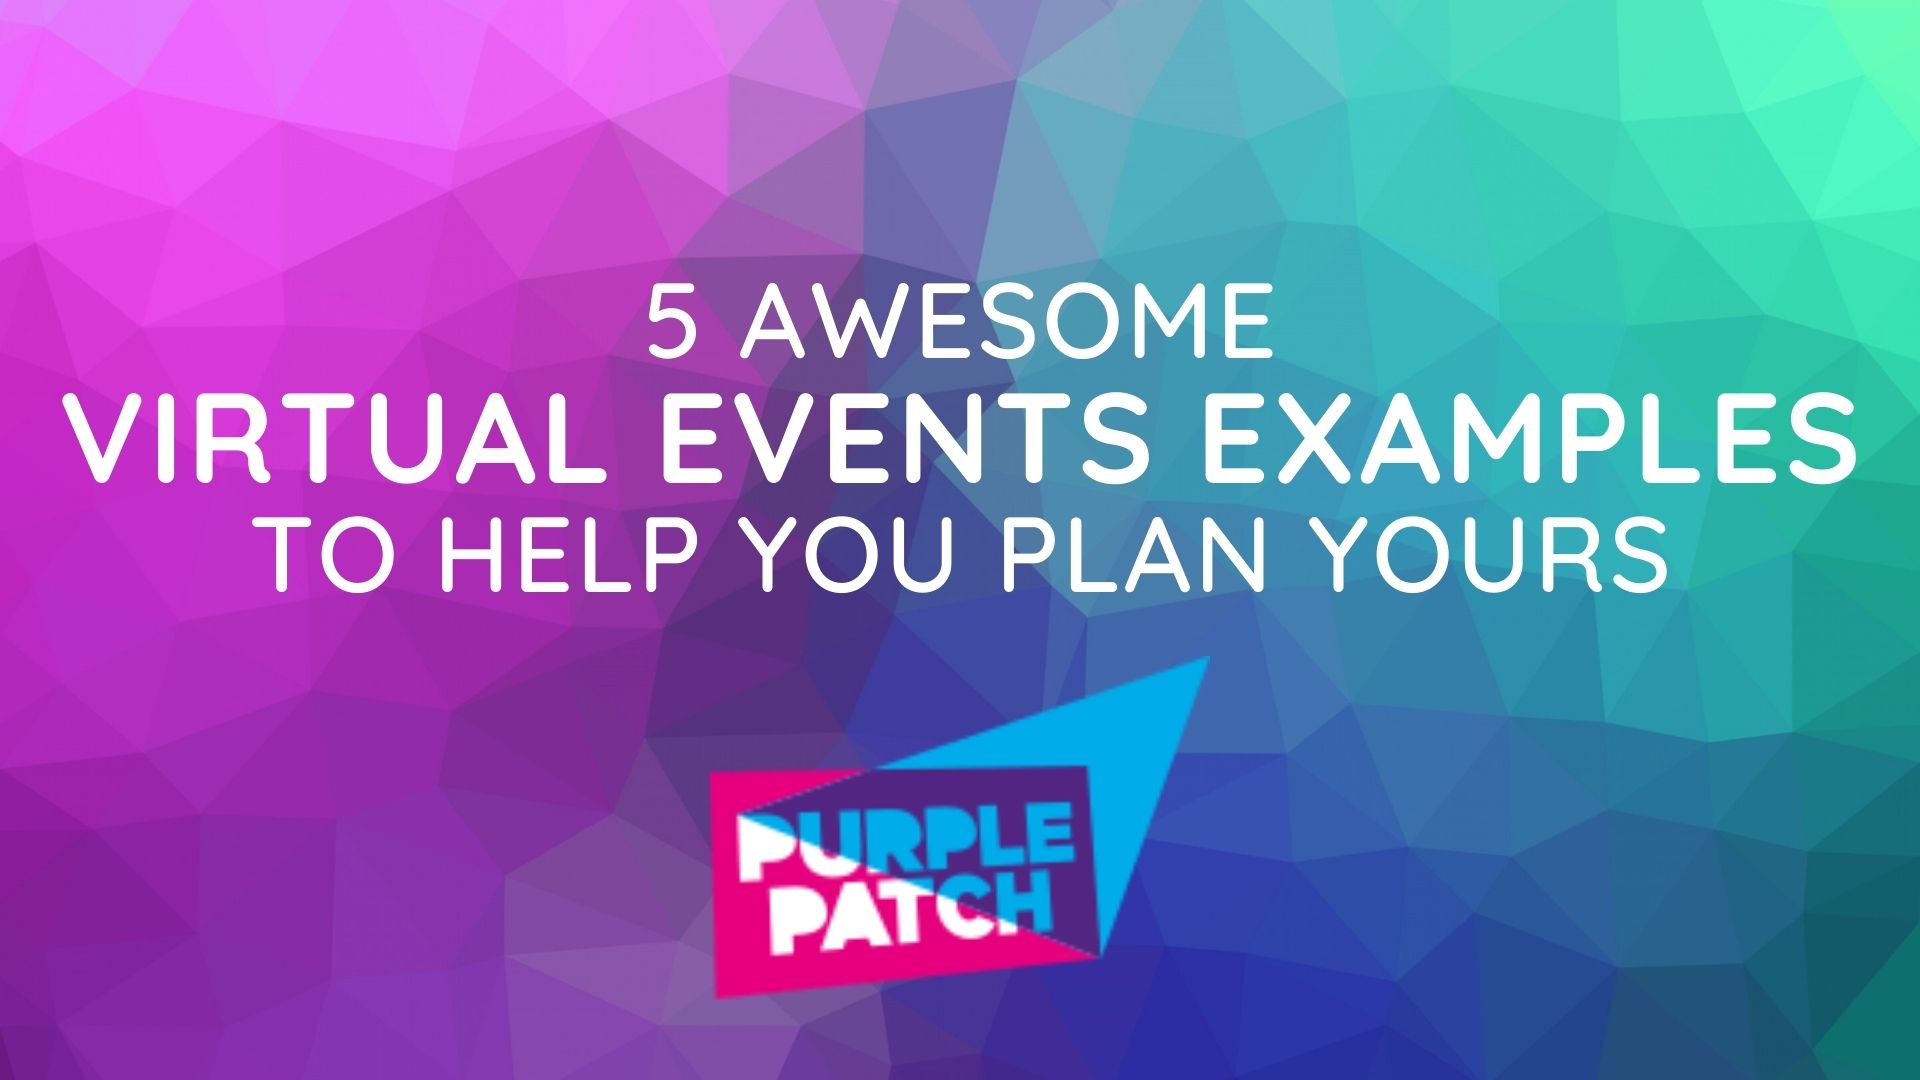 5 Awesome Virtual Events Examples to Help You Plan Yours